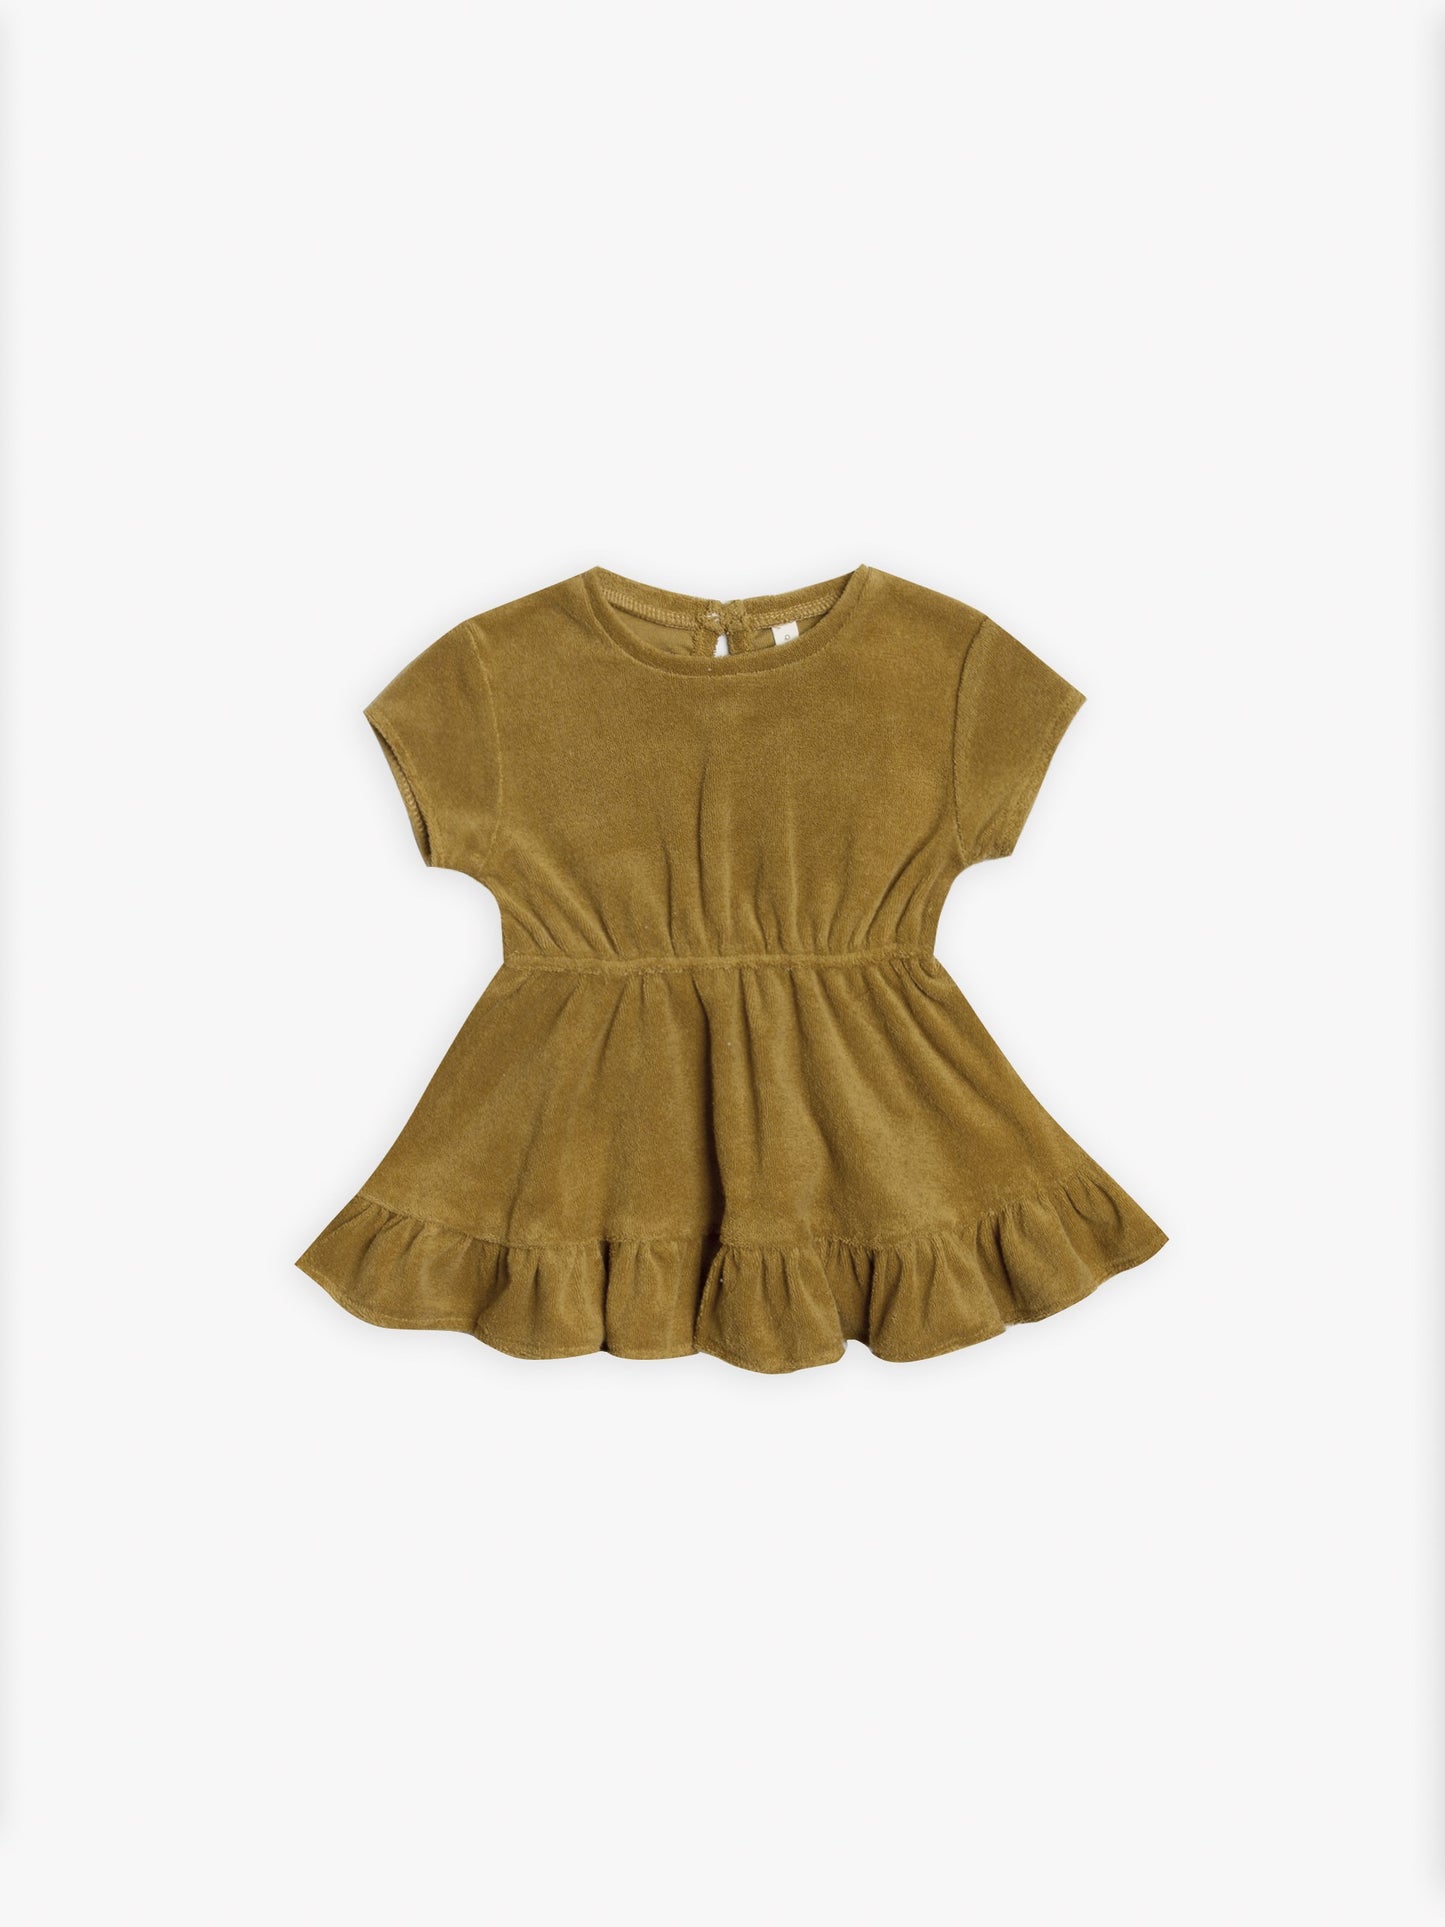 Quincy Mae Terry S/S Dress - Ocre